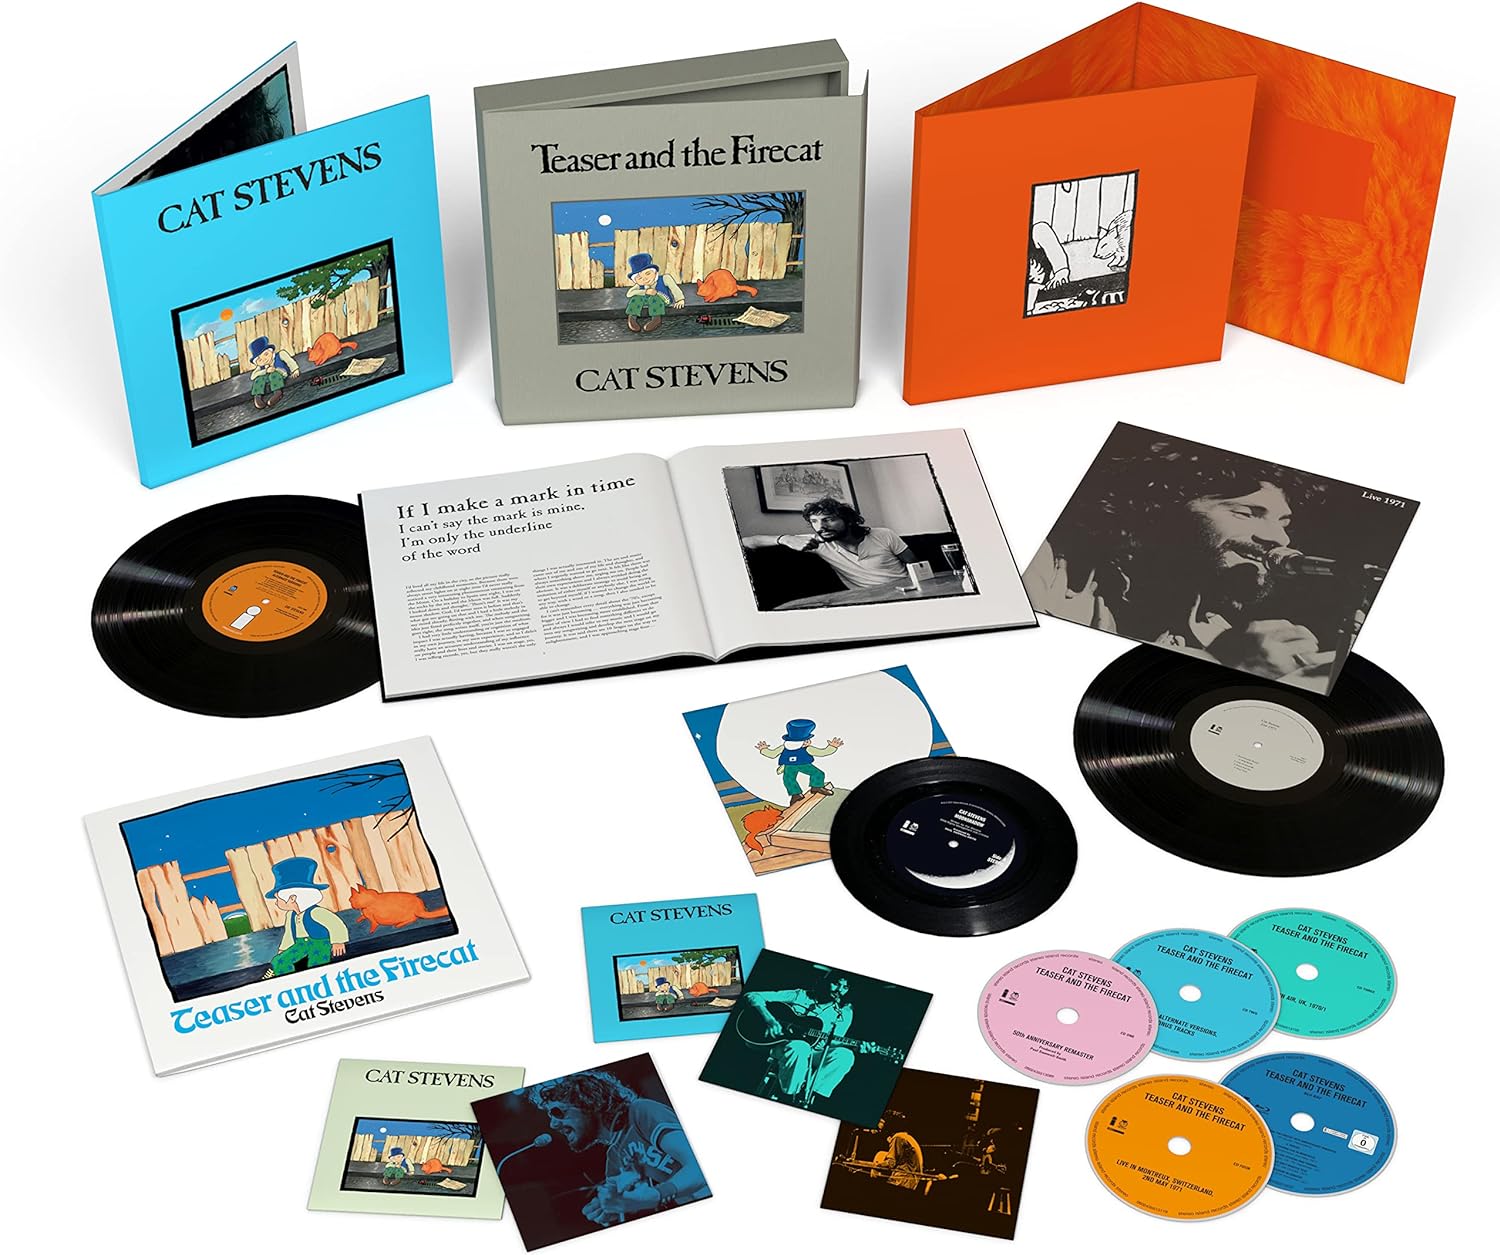 Teaser And The Firecat (50th Anniversary Edition) (Limited & Numbered Super Deluxe Box) - 2xVinyl, 4xCD, Blu-ray, Vinyl 7" | Cat Stevens